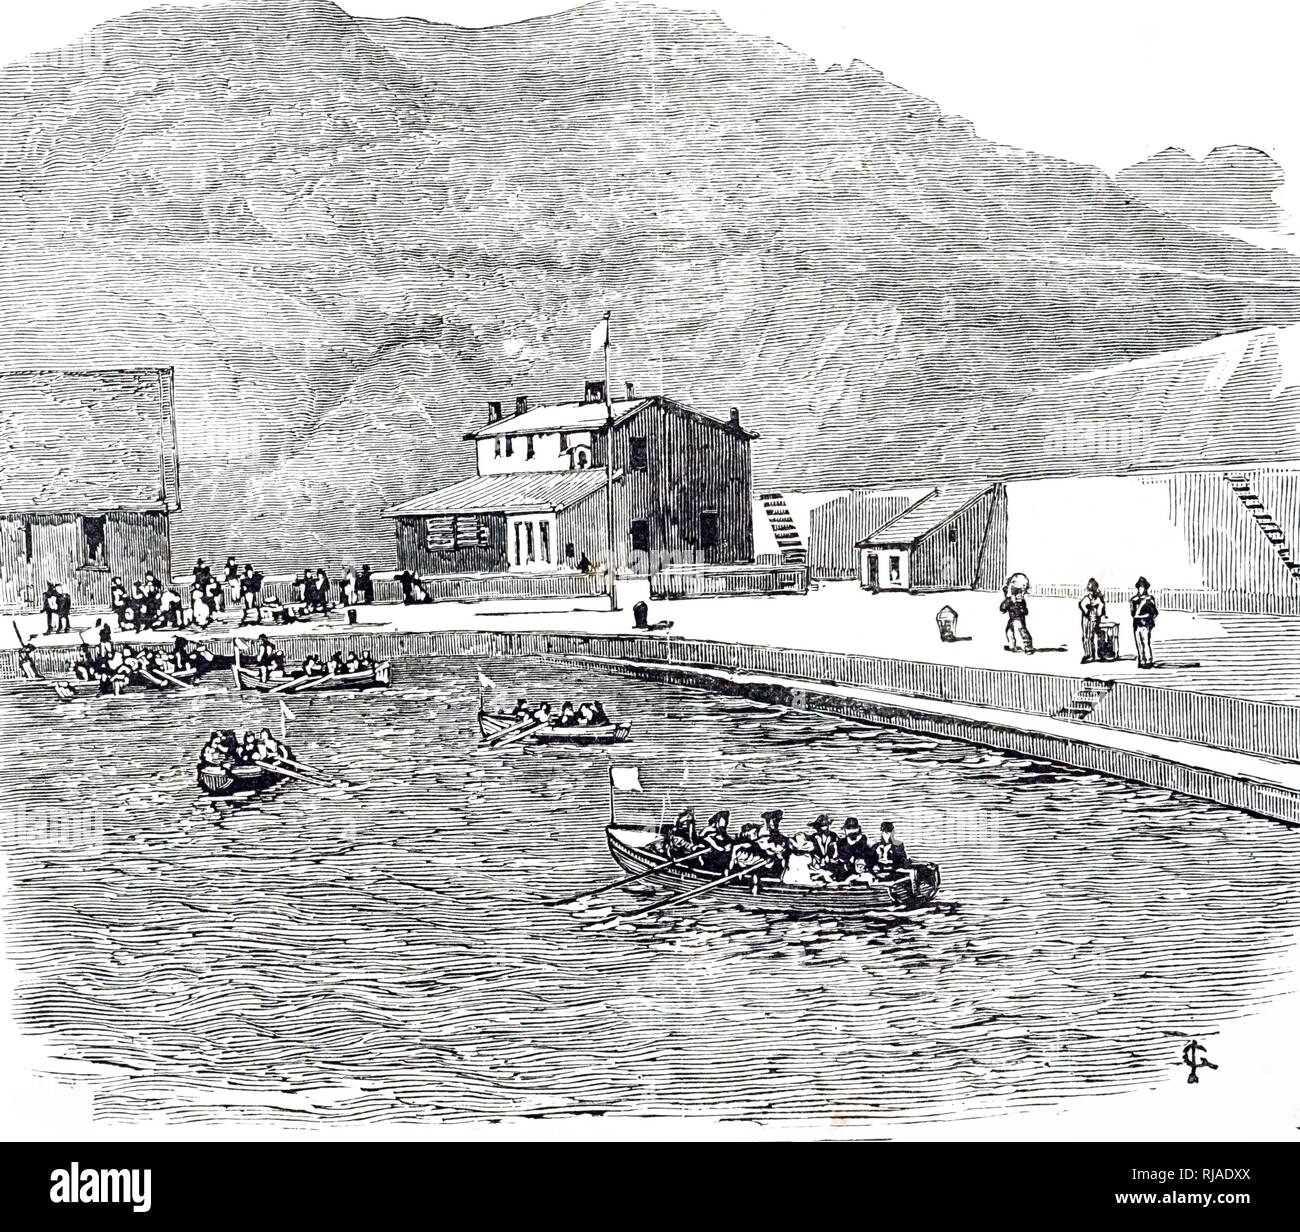 An engraving depicting a quarantine station after an outbreak of Cholera in Marseilles harbour, France. In the first week in July the mortality rate was 24 per day. Dated 19th century Stock Photo